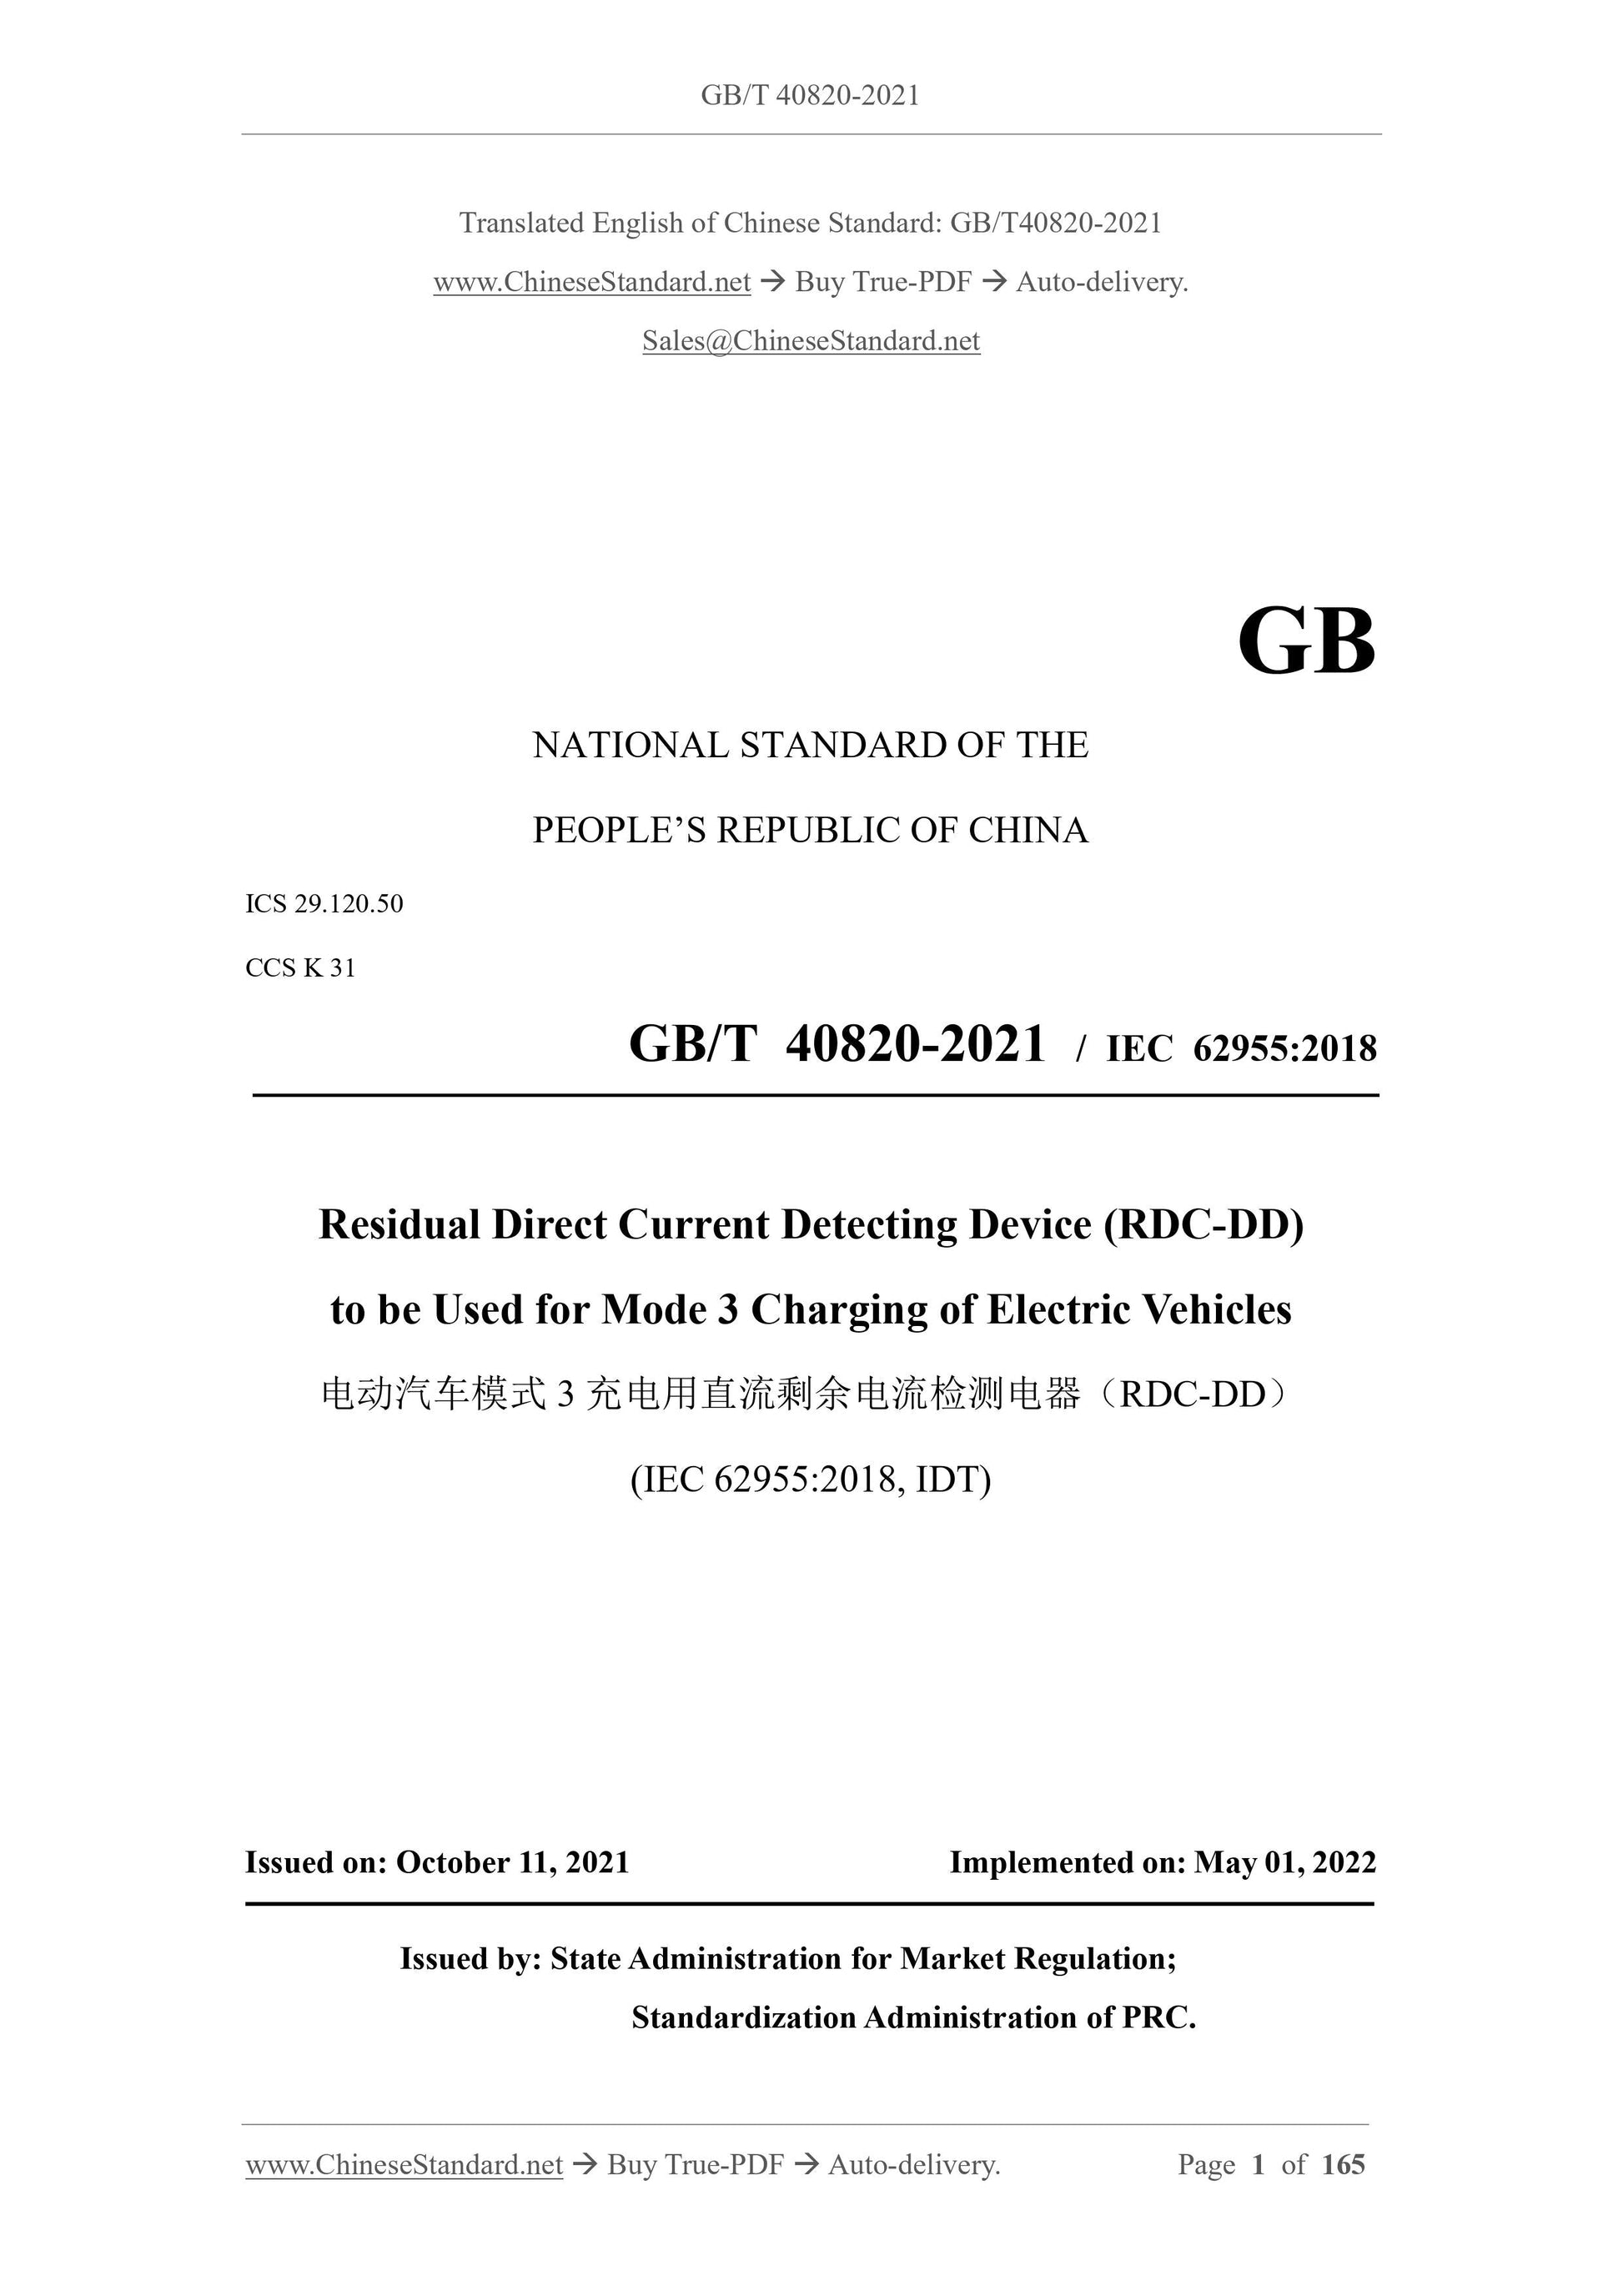 GB/T 40820-2021 Page 1